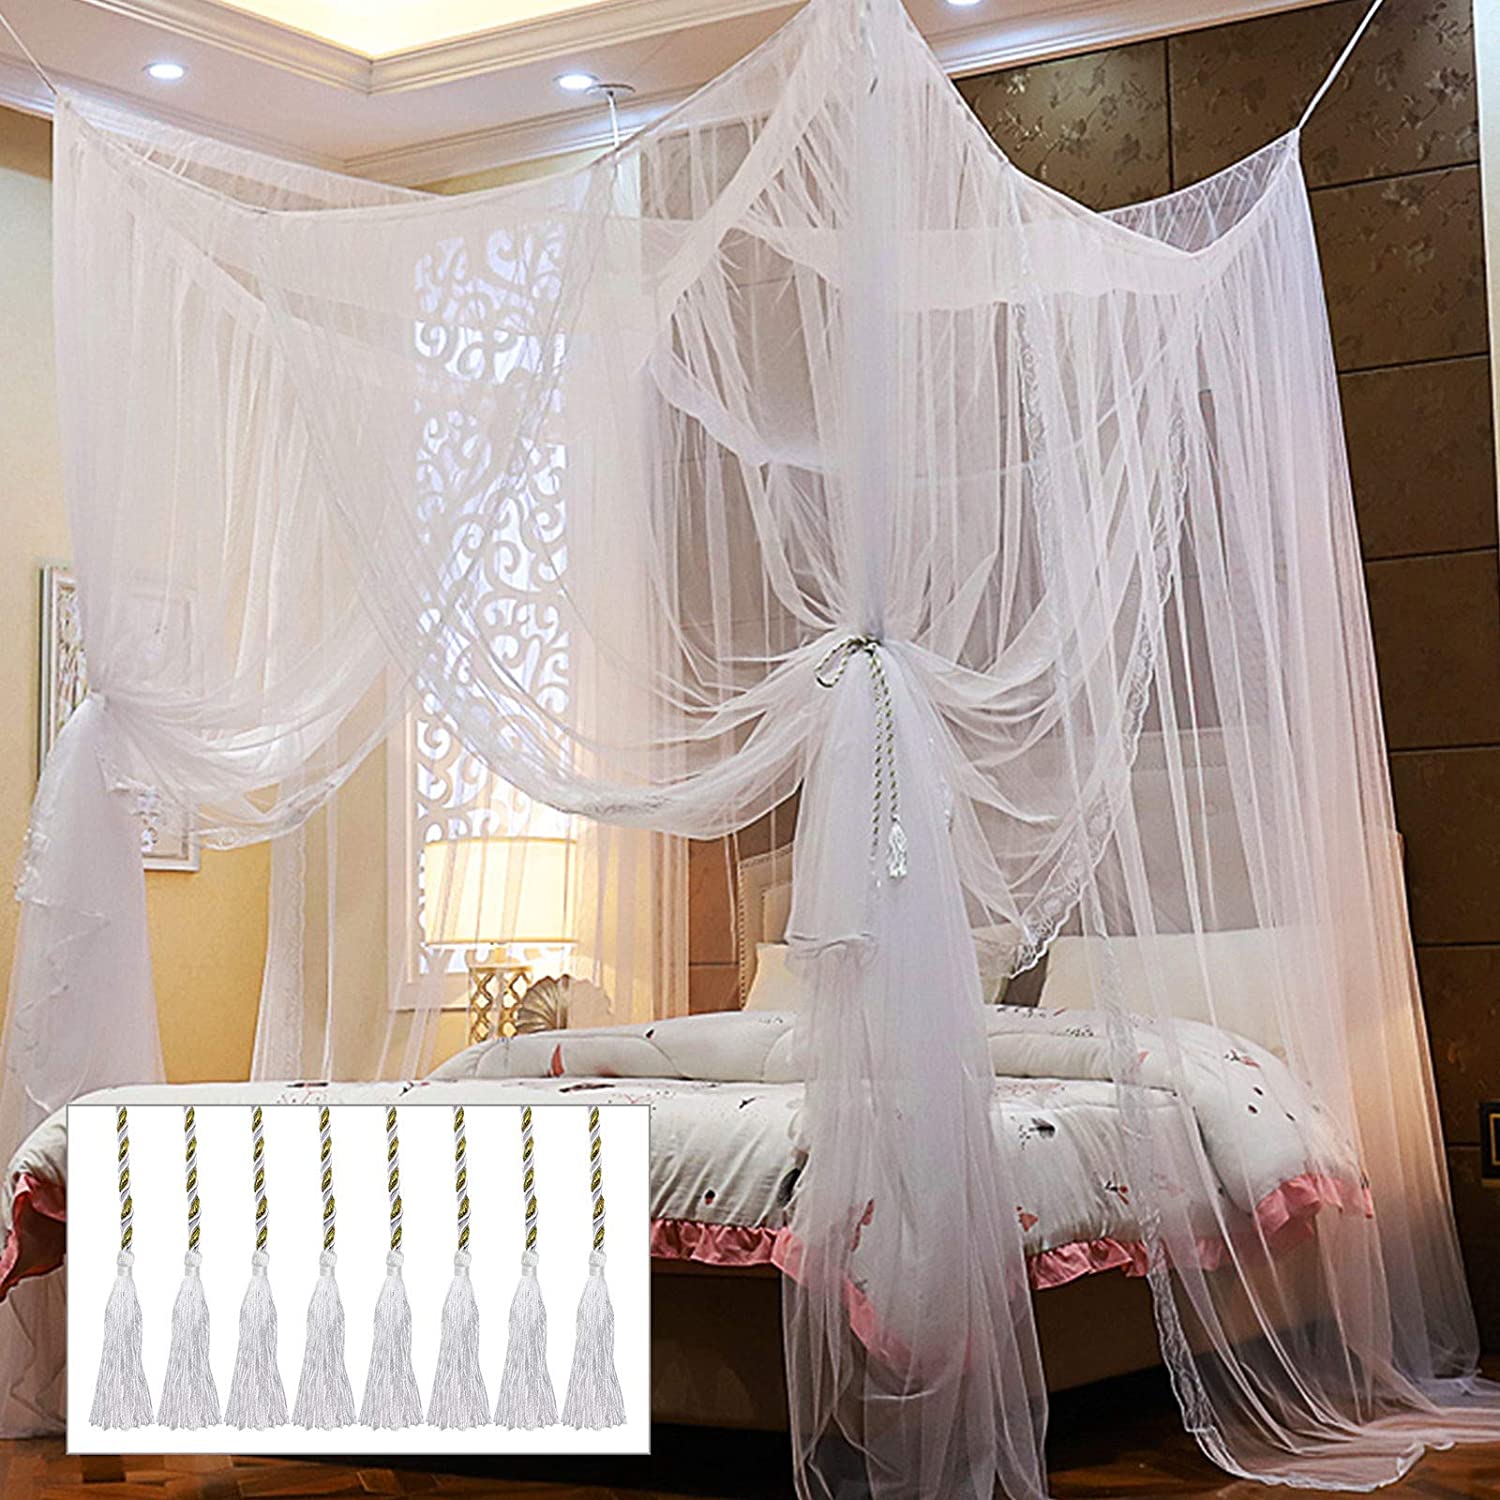 4 Corners Post Bed Canopy Curtain Mosquito Net Or Frame Twin Full Queen King 